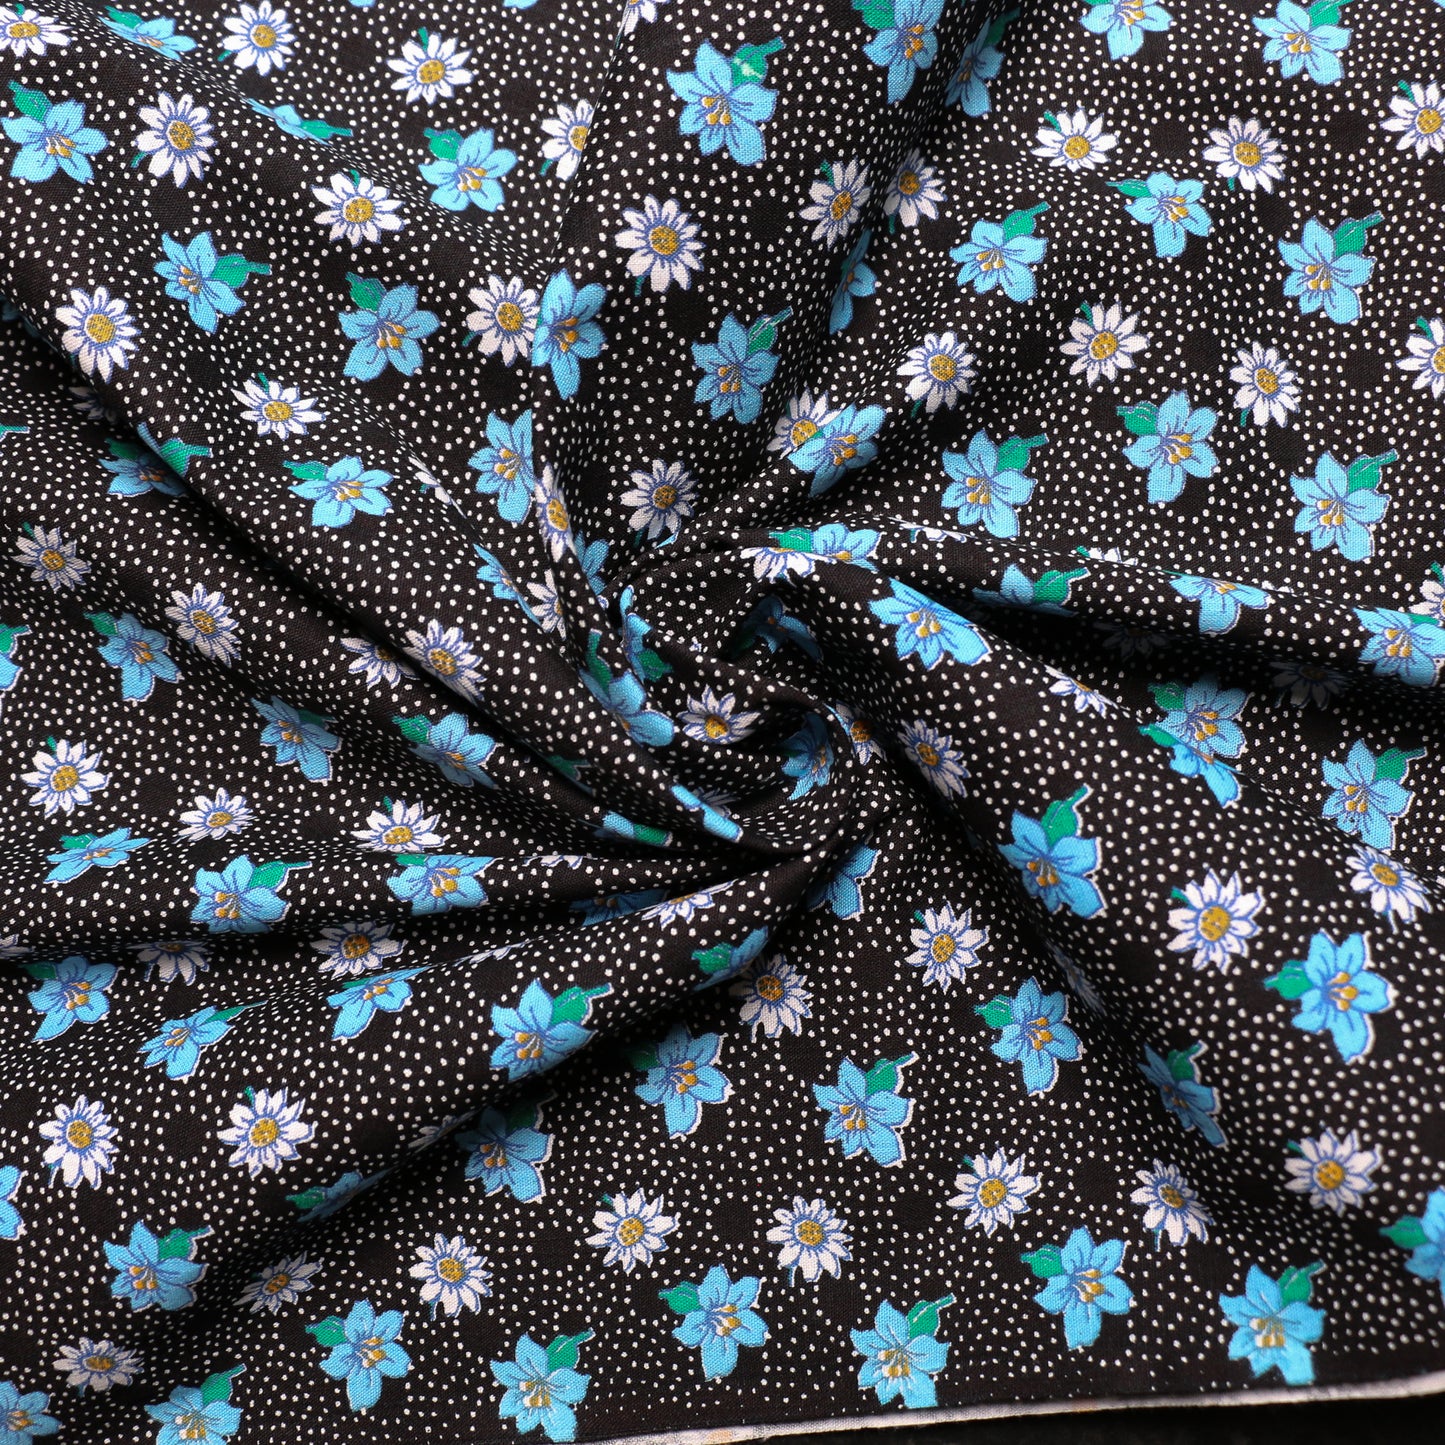 black vintage cotton poplin deadstock sustainable fabric with printed daisy pattern